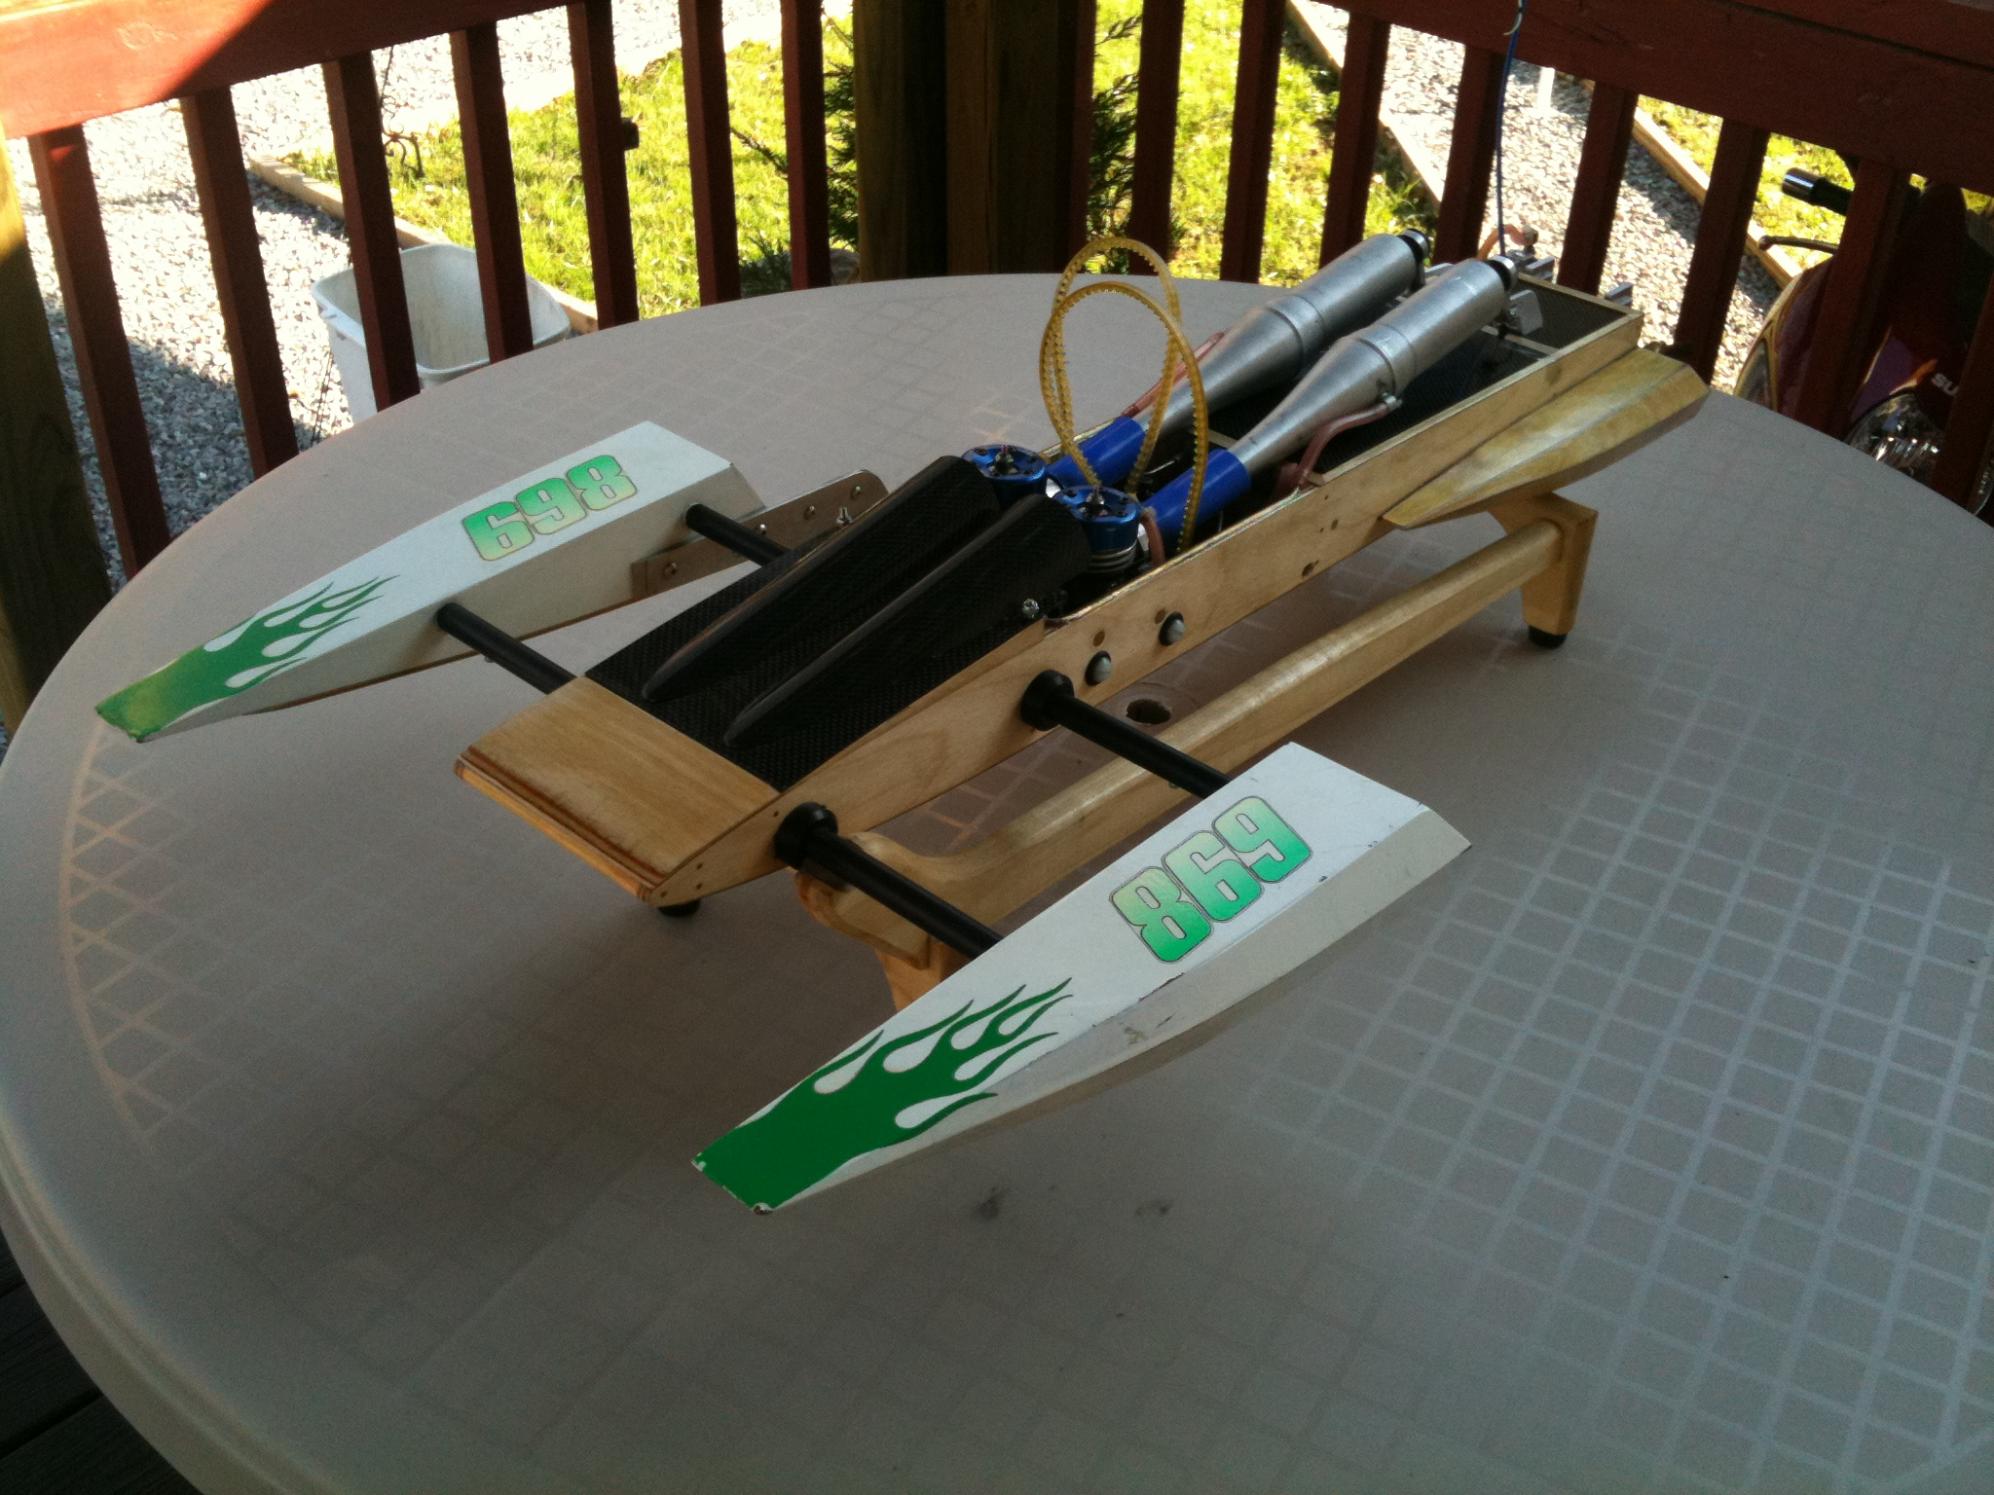 Videos of your boats - Page 2 - R/C Tech Forums